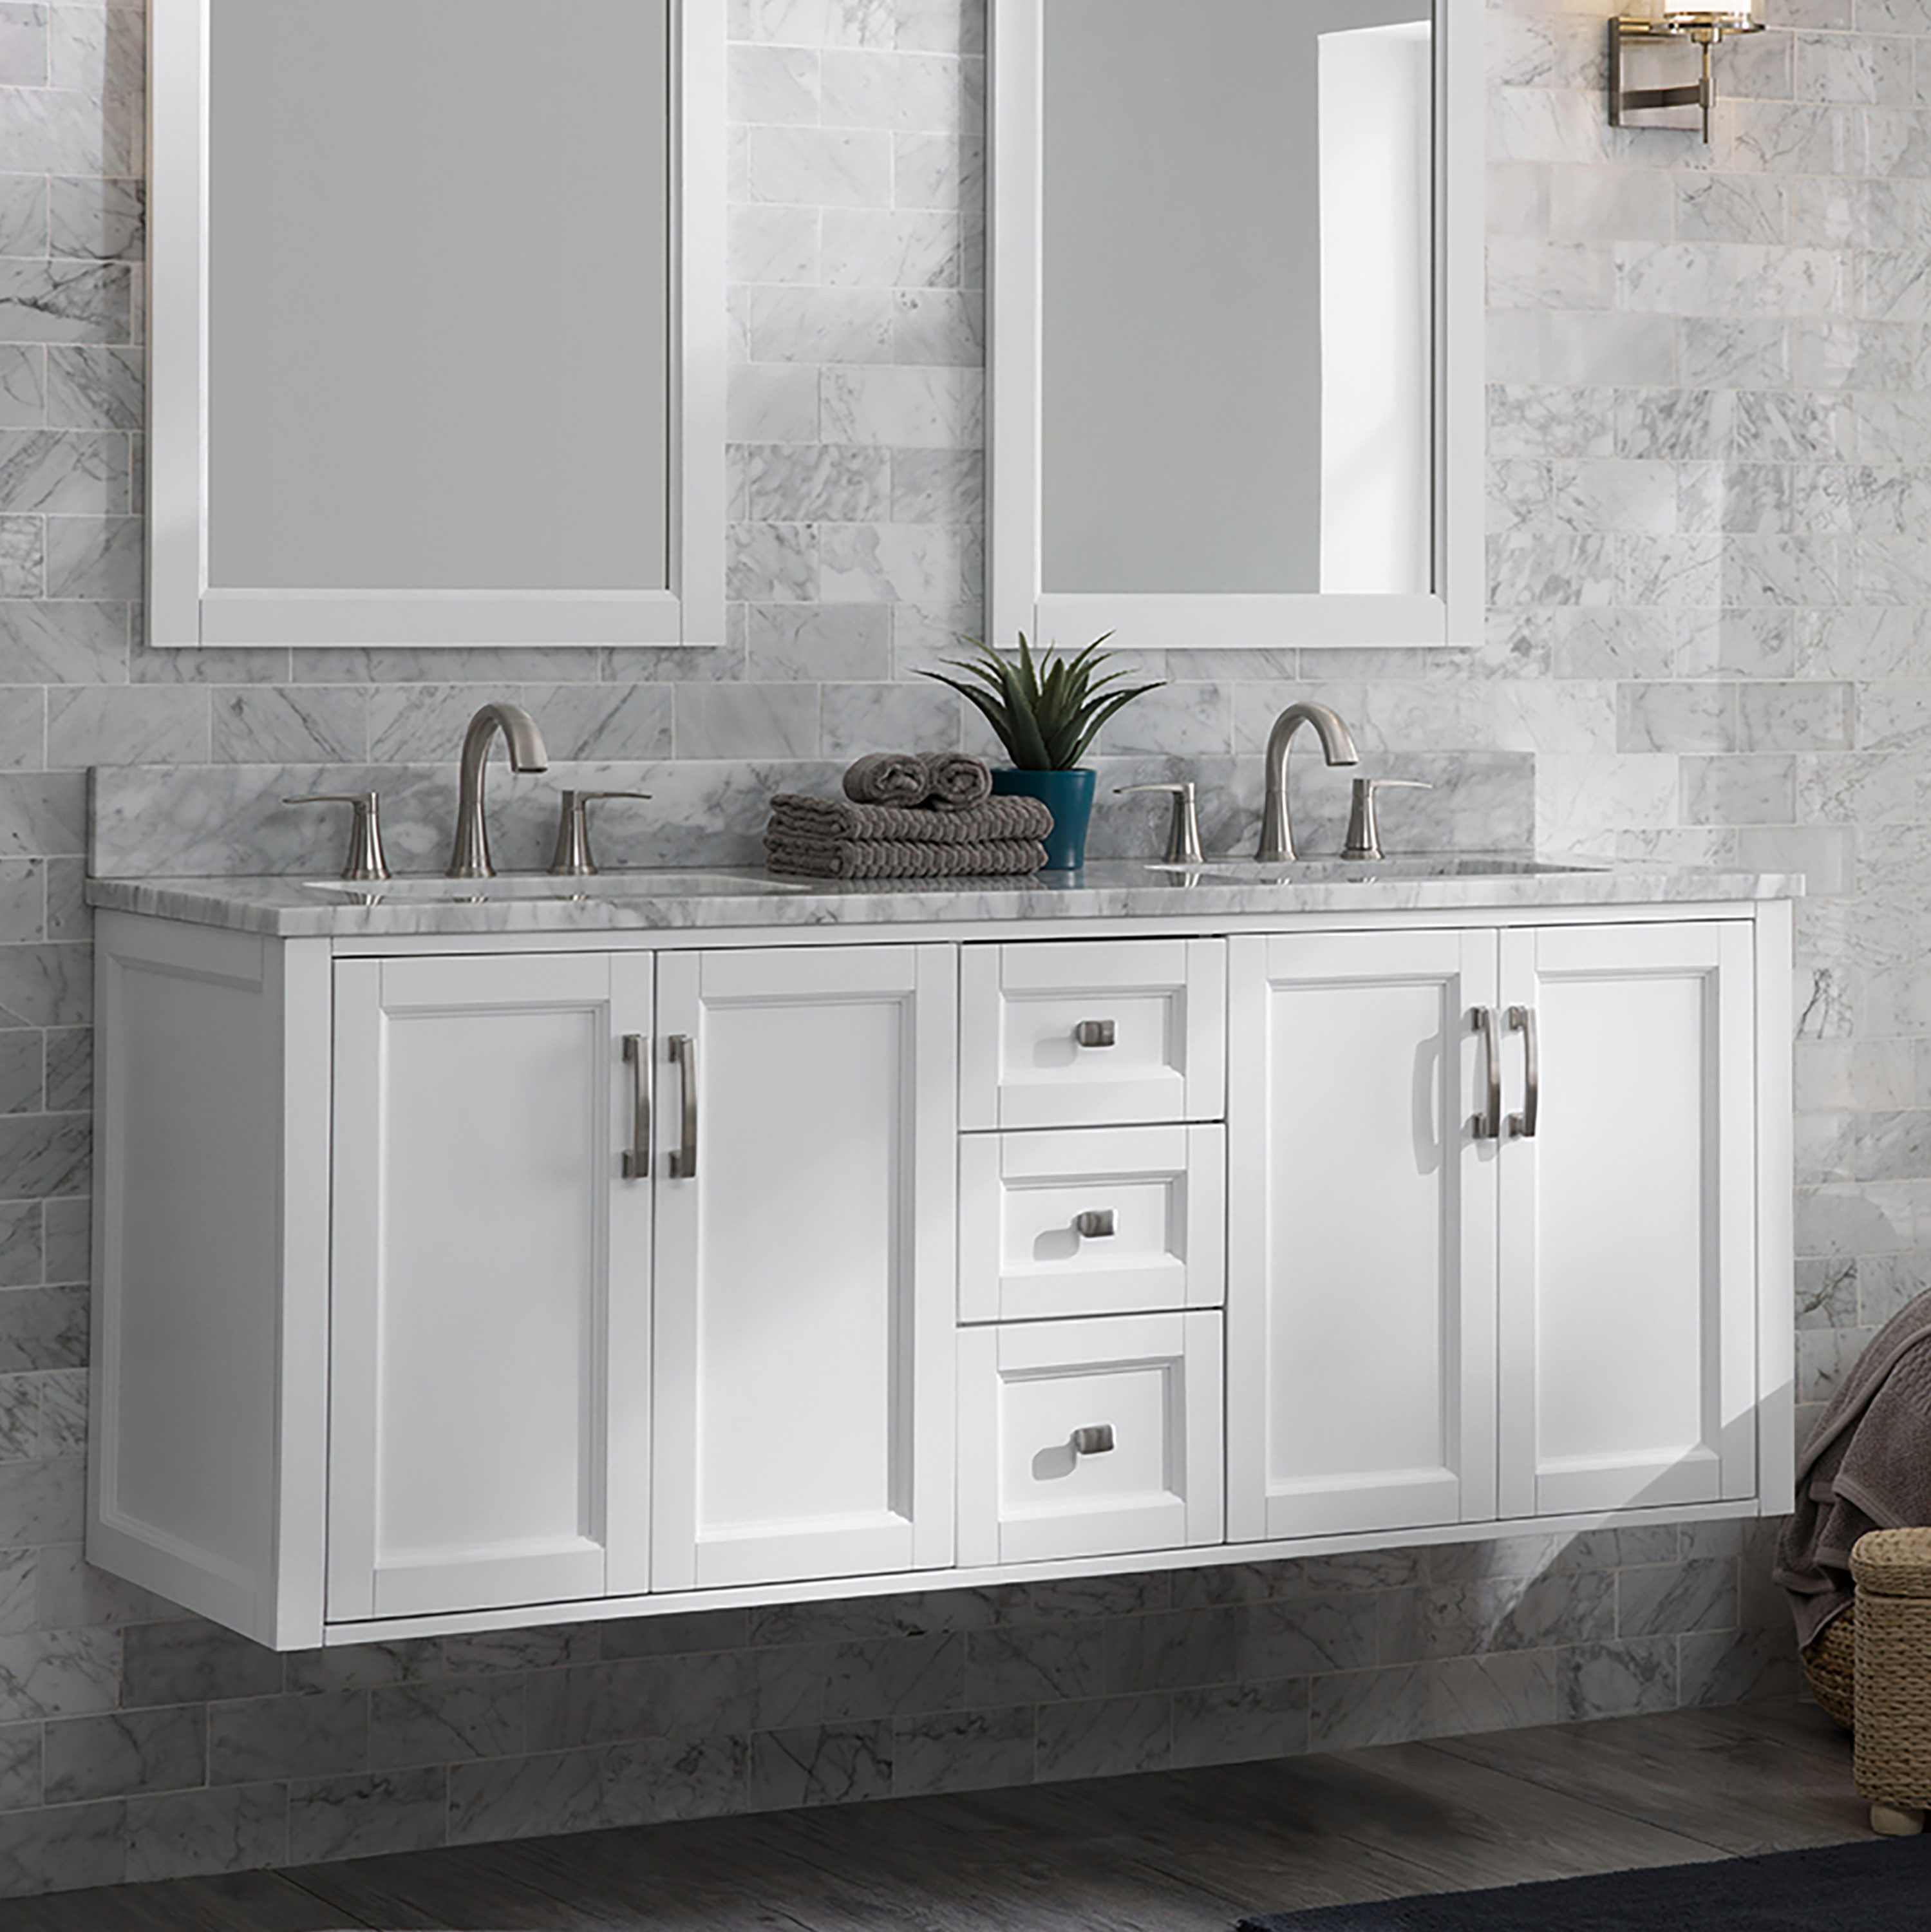 Allen Roth Floating 60 In White Undermount Double Sink Bathroom Vanity With Natural Carrara Marble Top The Vanities Tops Department At Com - Bathroom Vanity With Top Without Sink